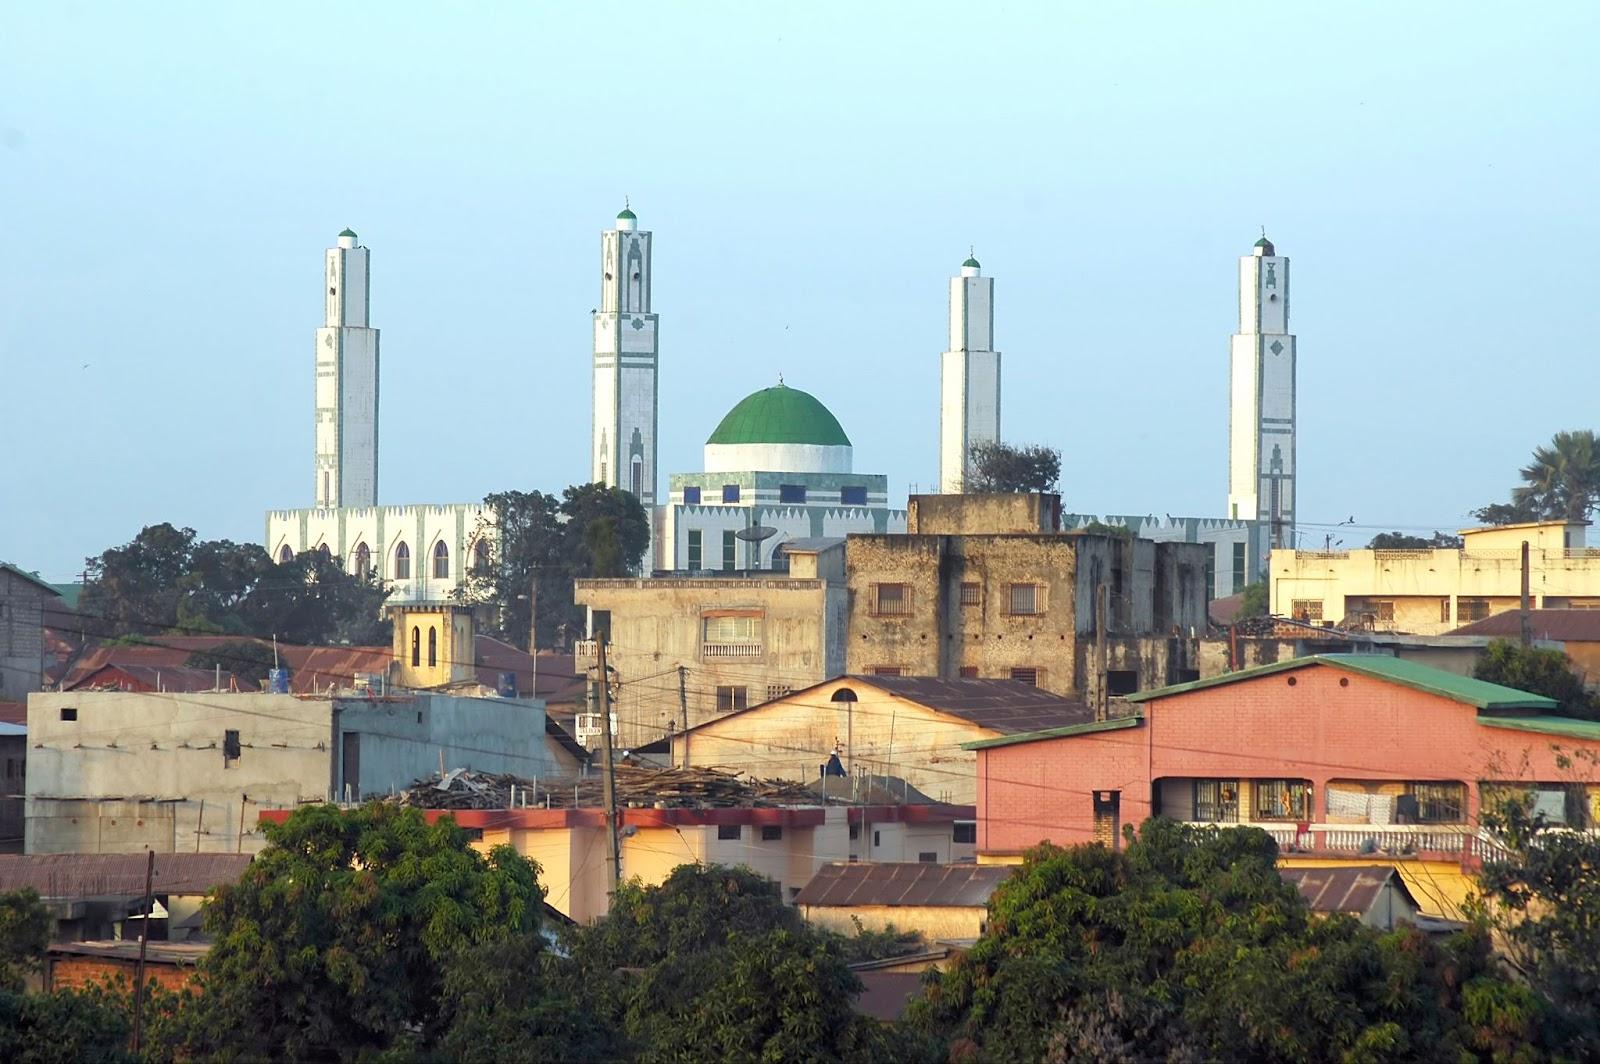 A close up view of the mosque in Labe in Guinea.